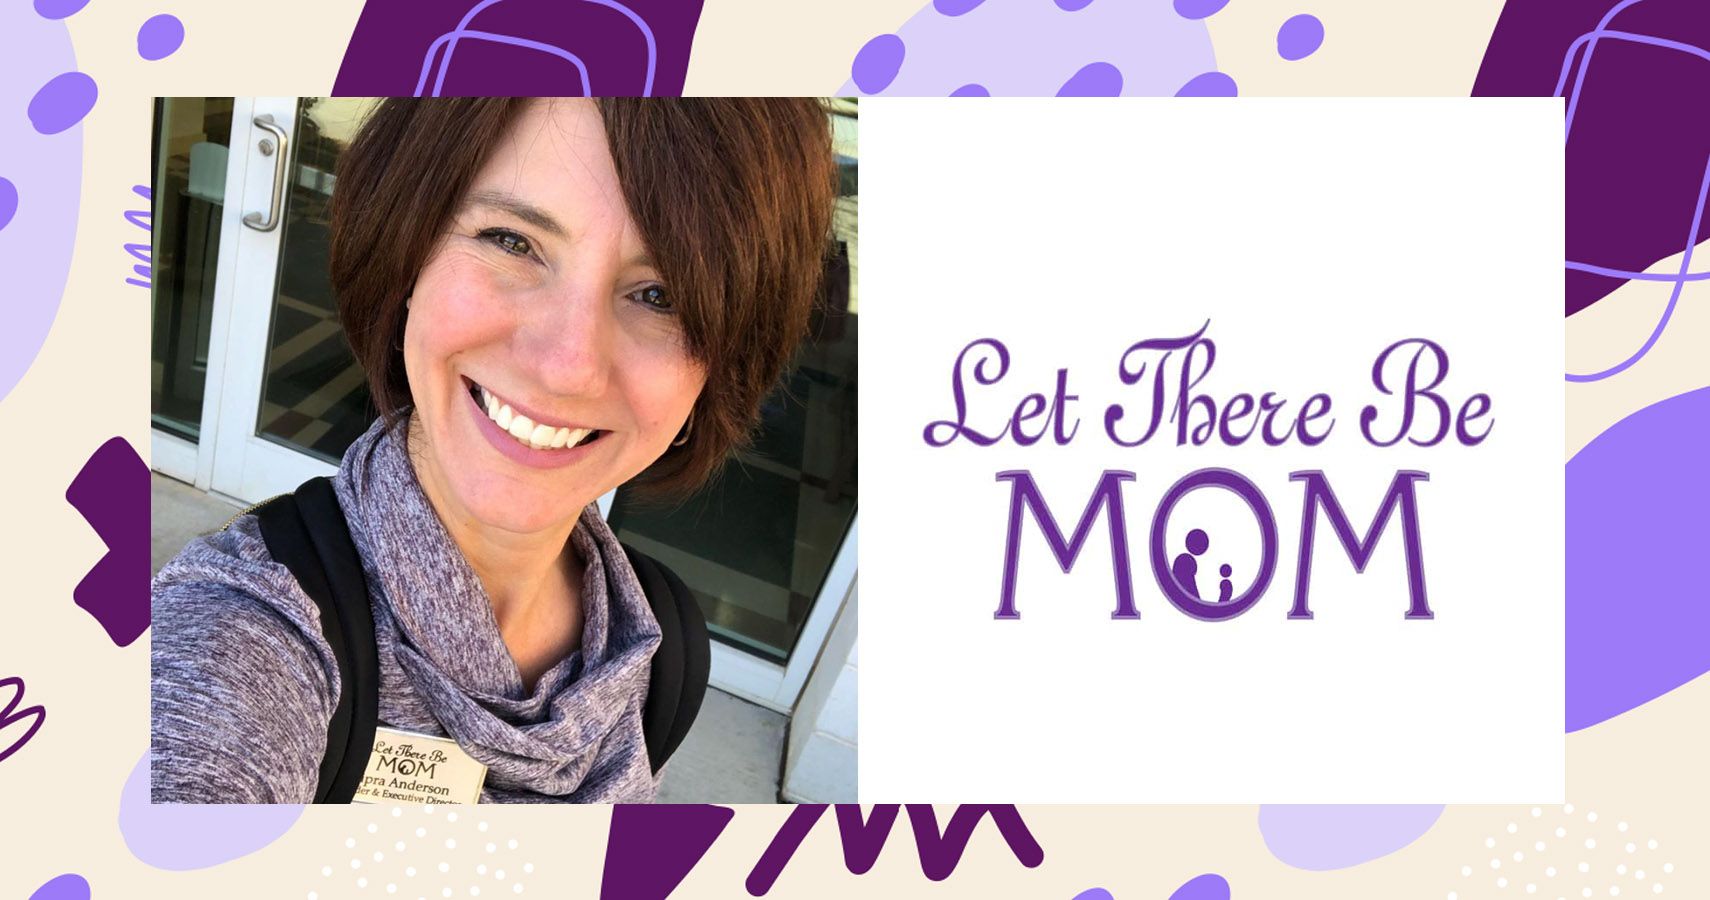 What Is The Non-Profit 'Let There Be Mom?'